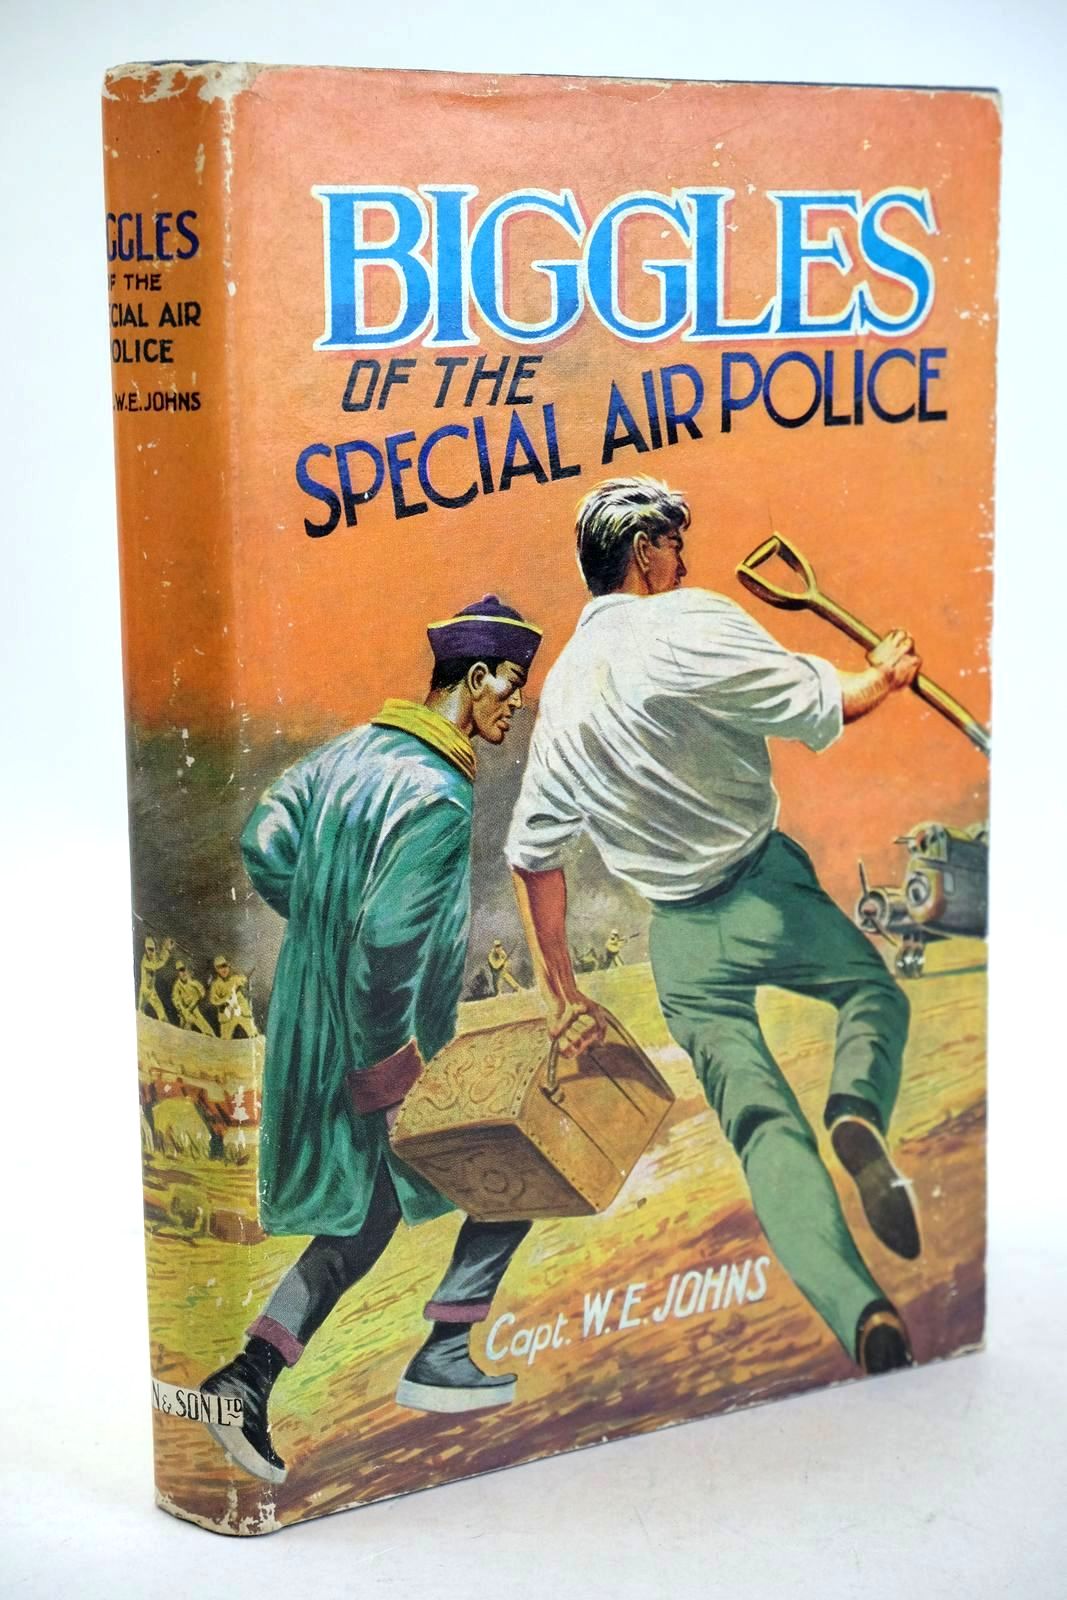 Photo of BIGGLES OF THE SPECIAL AIR POLICE written by Johns, W.E. published by Dean &amp; Son Ltd. (STOCK CODE: 1326559)  for sale by Stella & Rose's Books